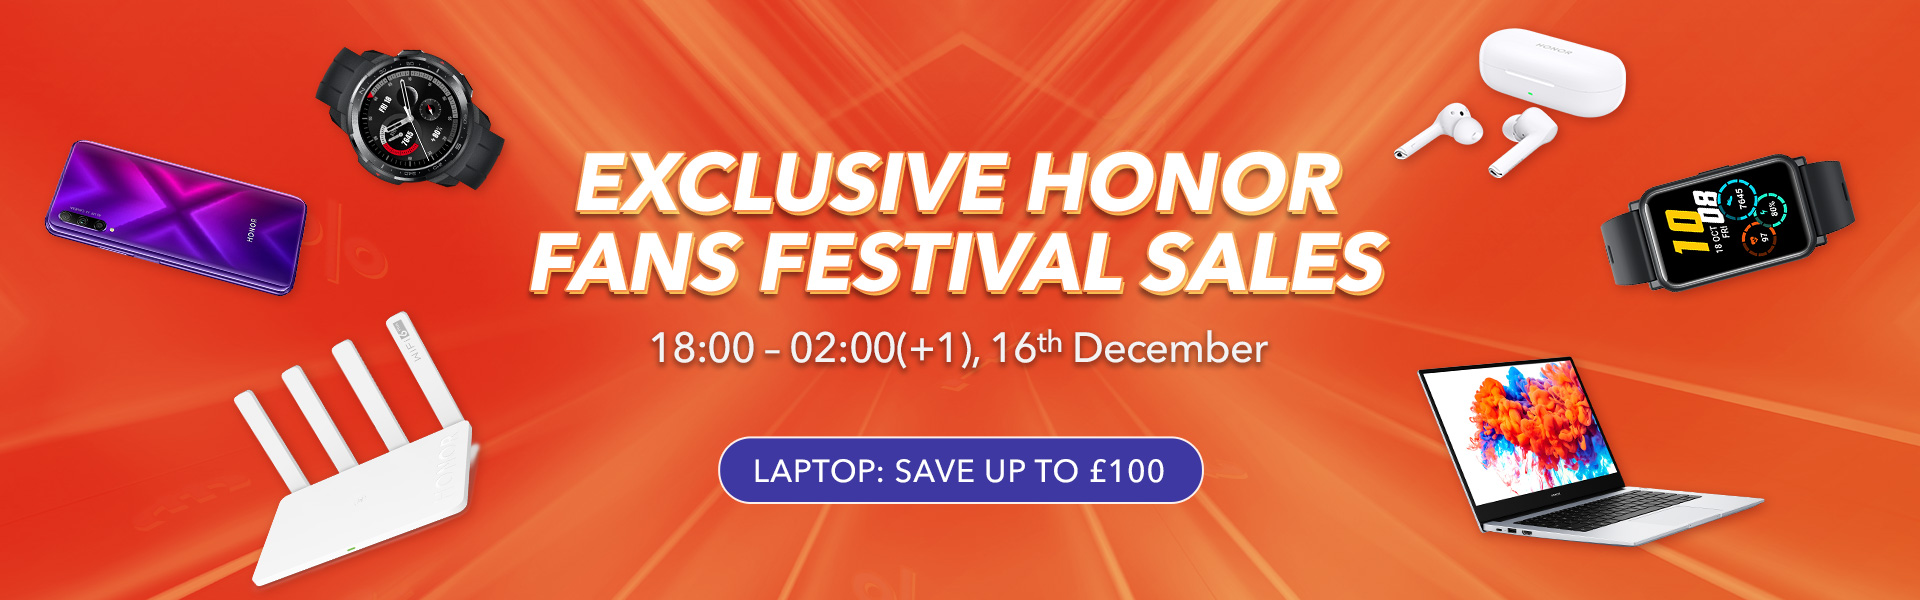 Exclusive HONOR Fans Festival Sales at HIHONOR Store